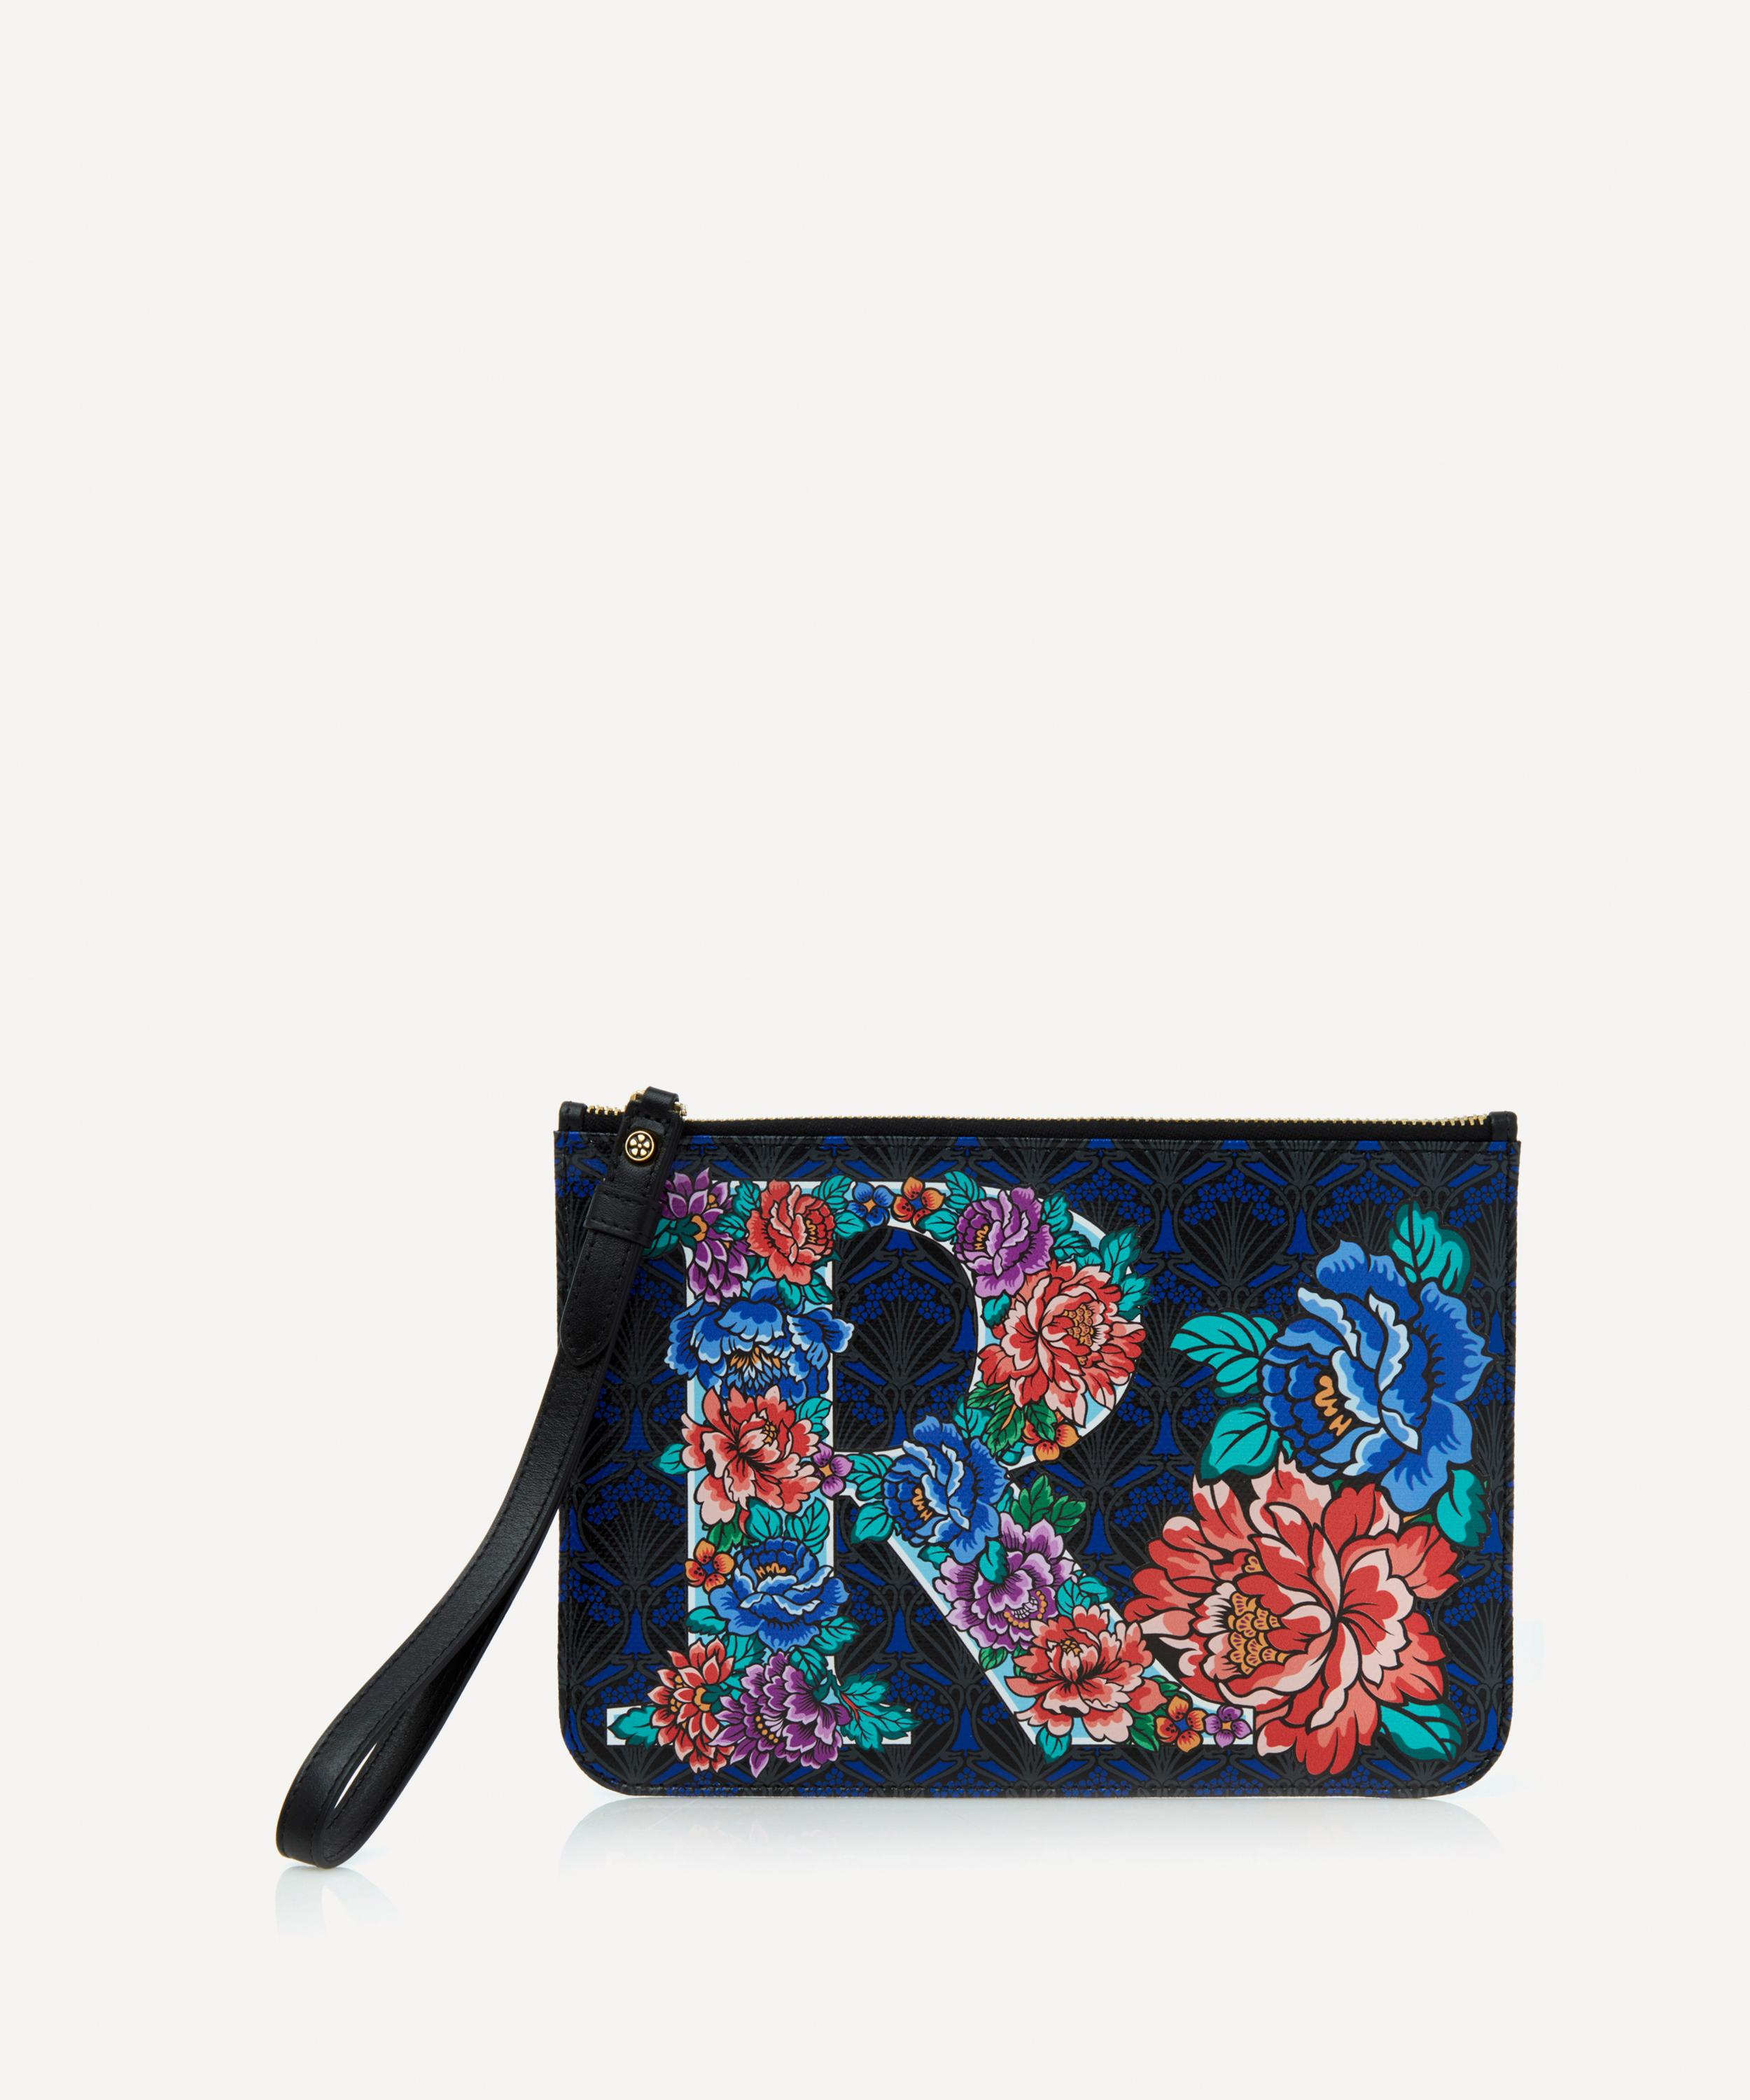 Small Accessories | Liberty Products | Liberty London